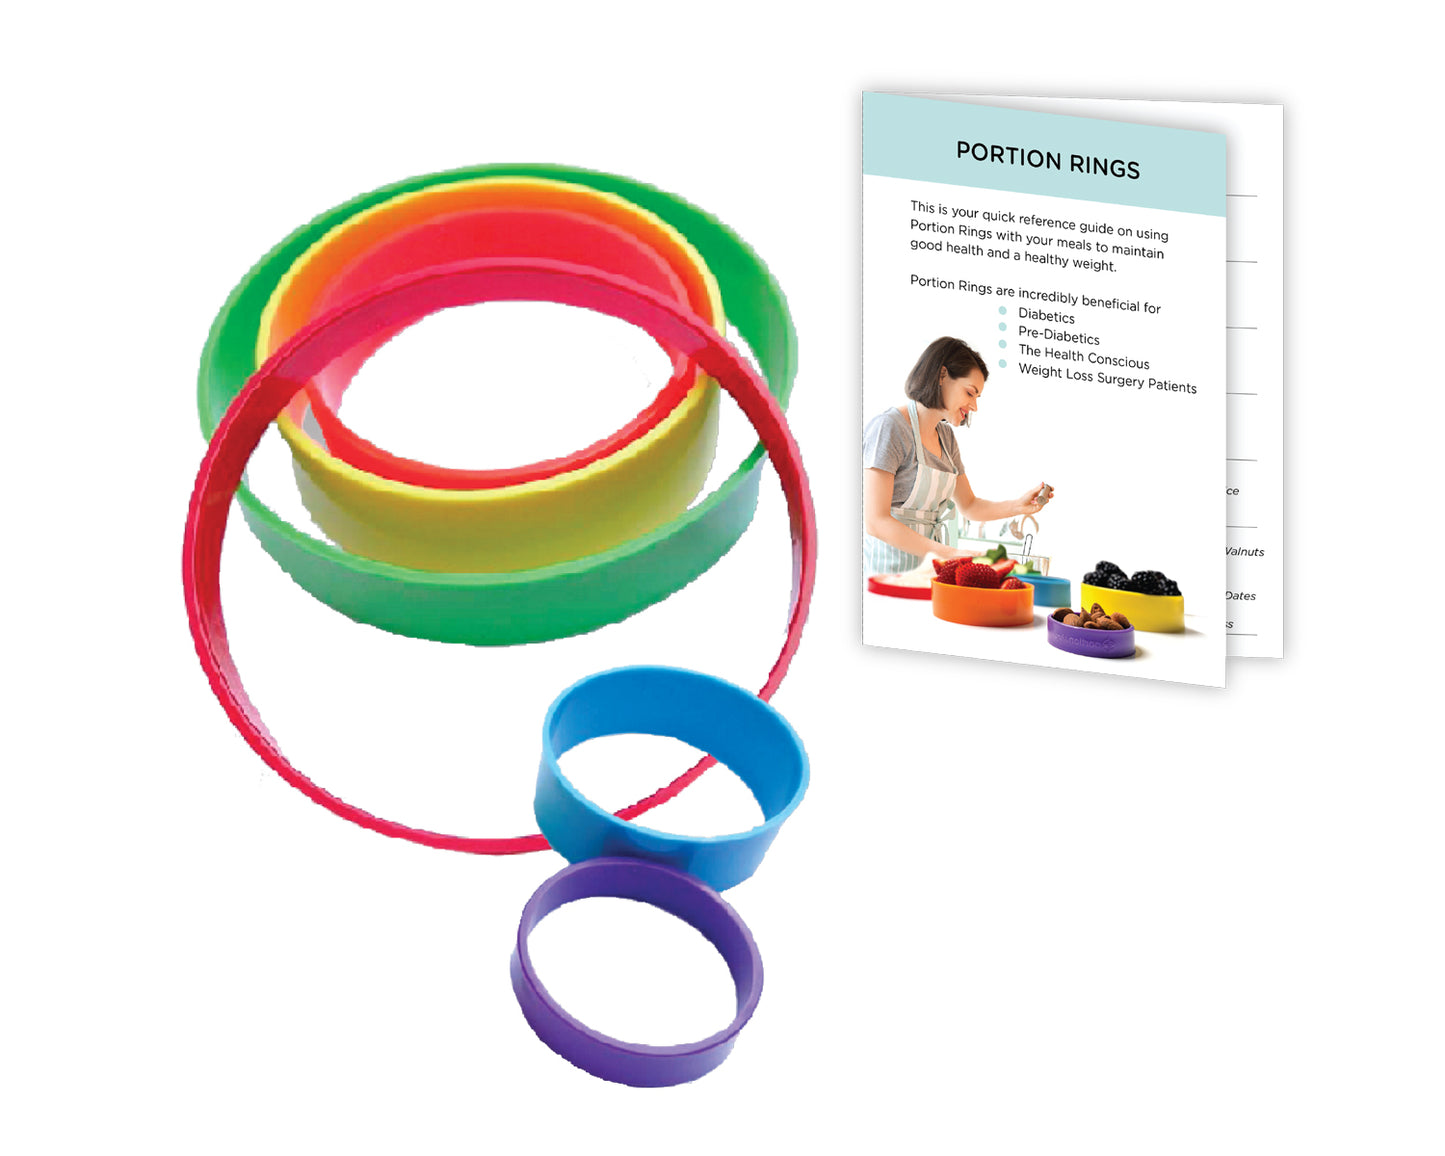 Portion Control Rings and reference guide